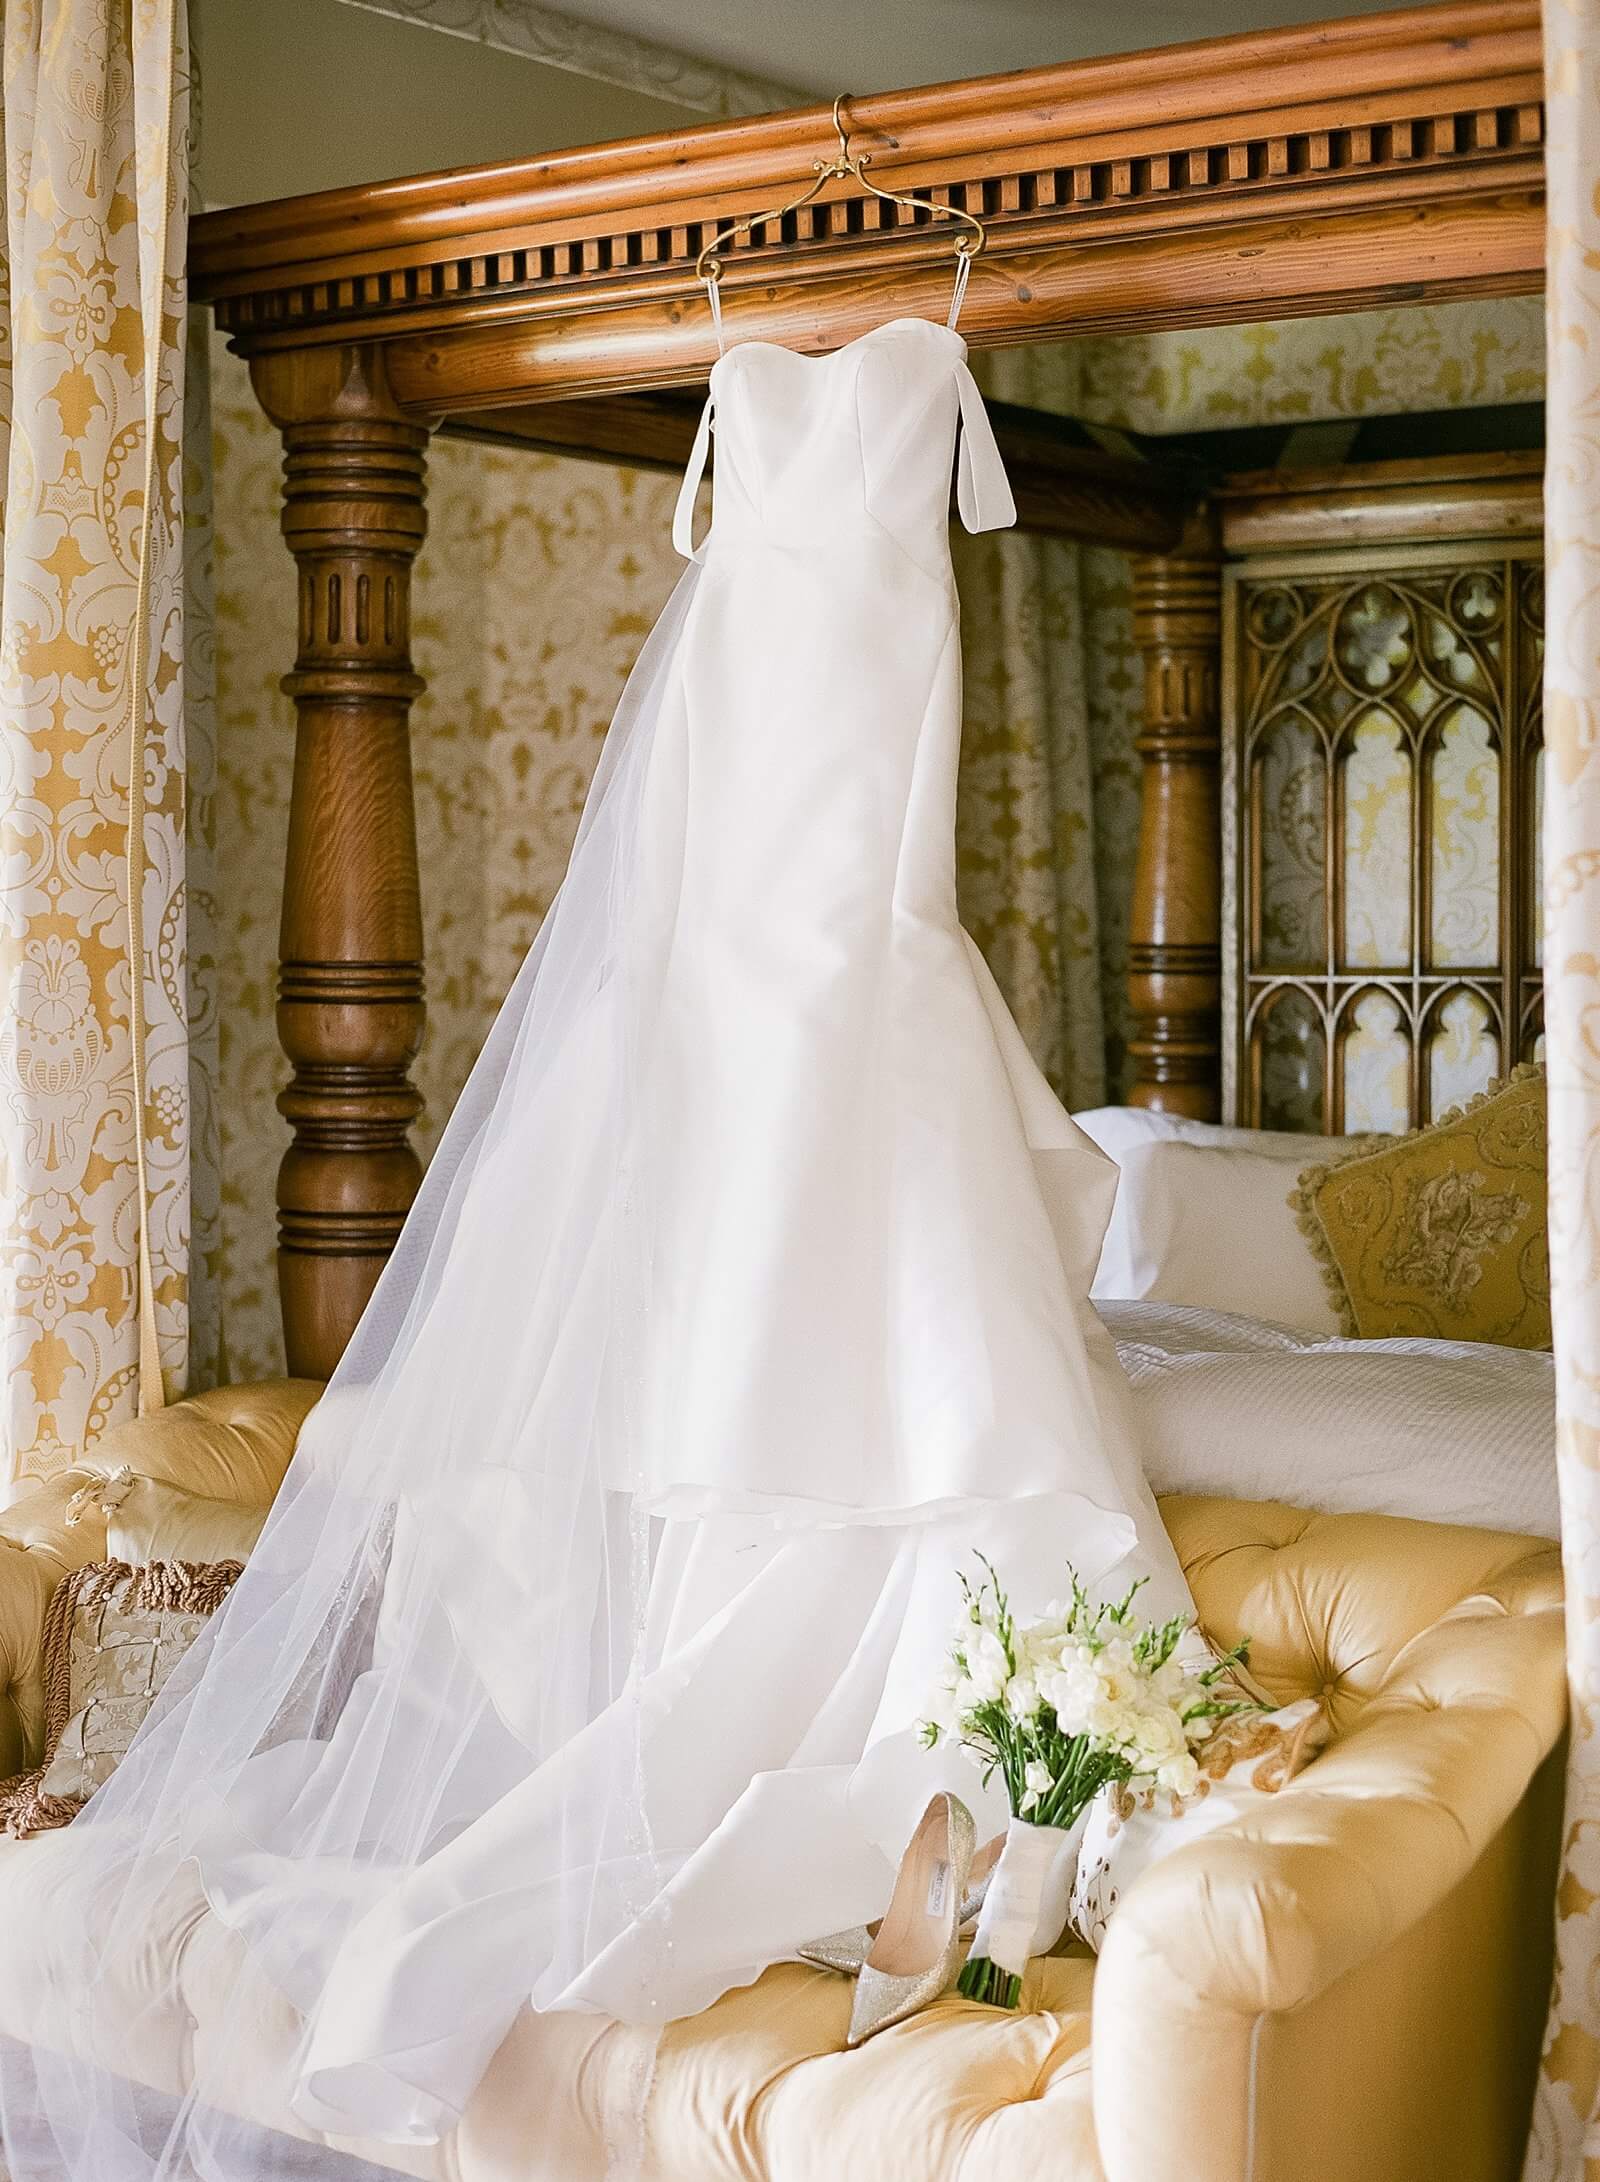 Image of bride's dress at a wedding at Dover Hall Estate